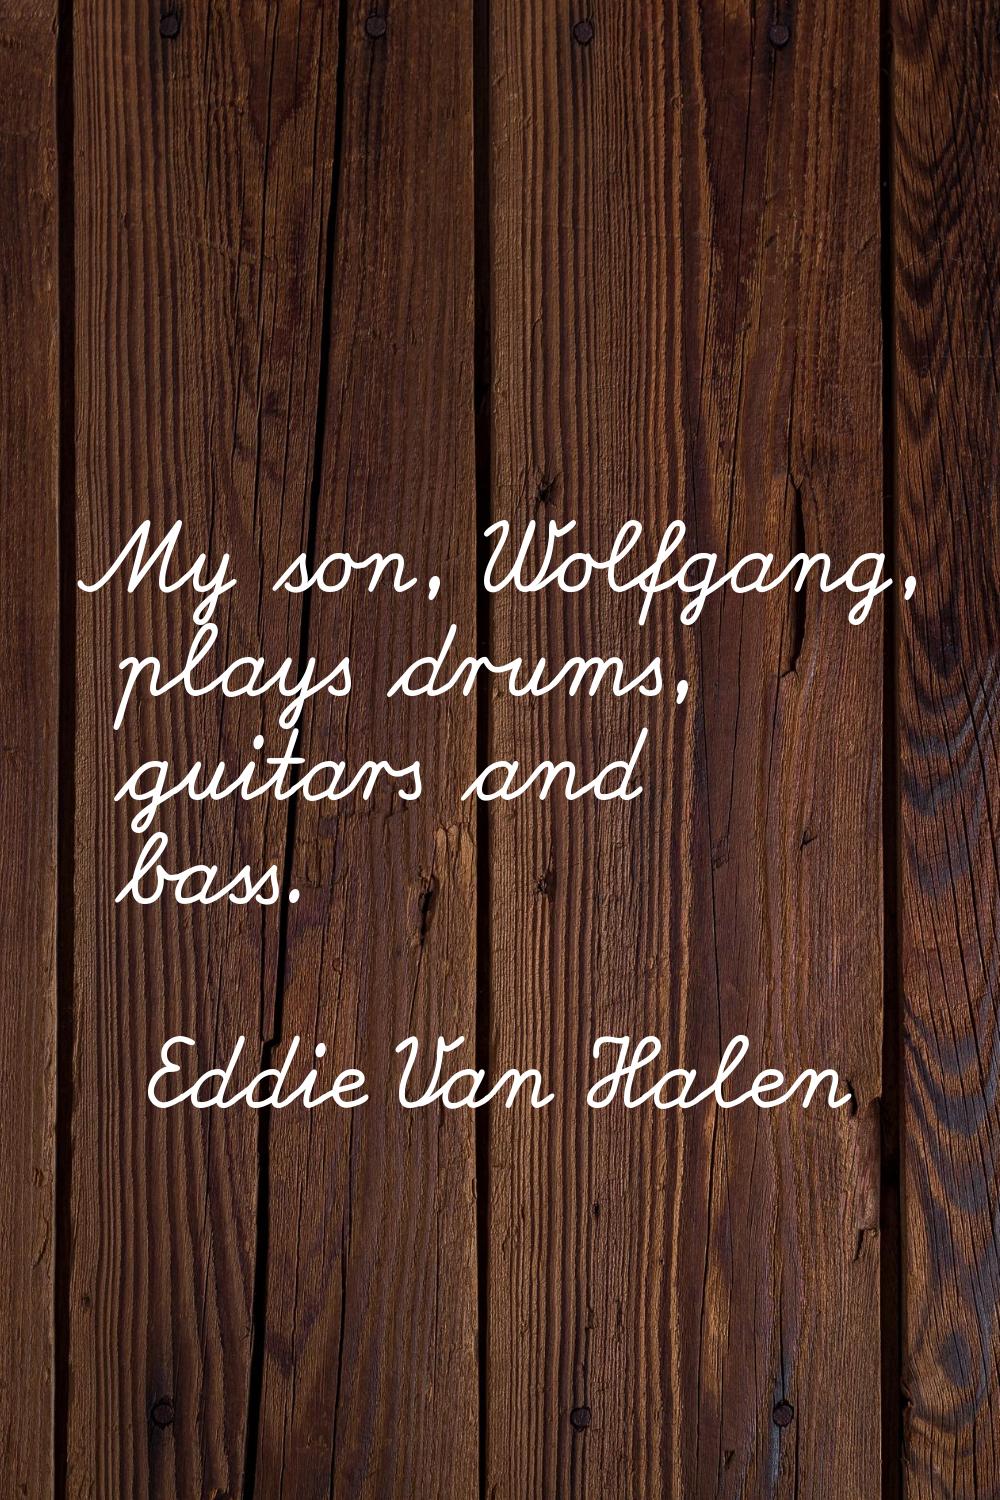 My son, Wolfgang, plays drums, guitars and bass.